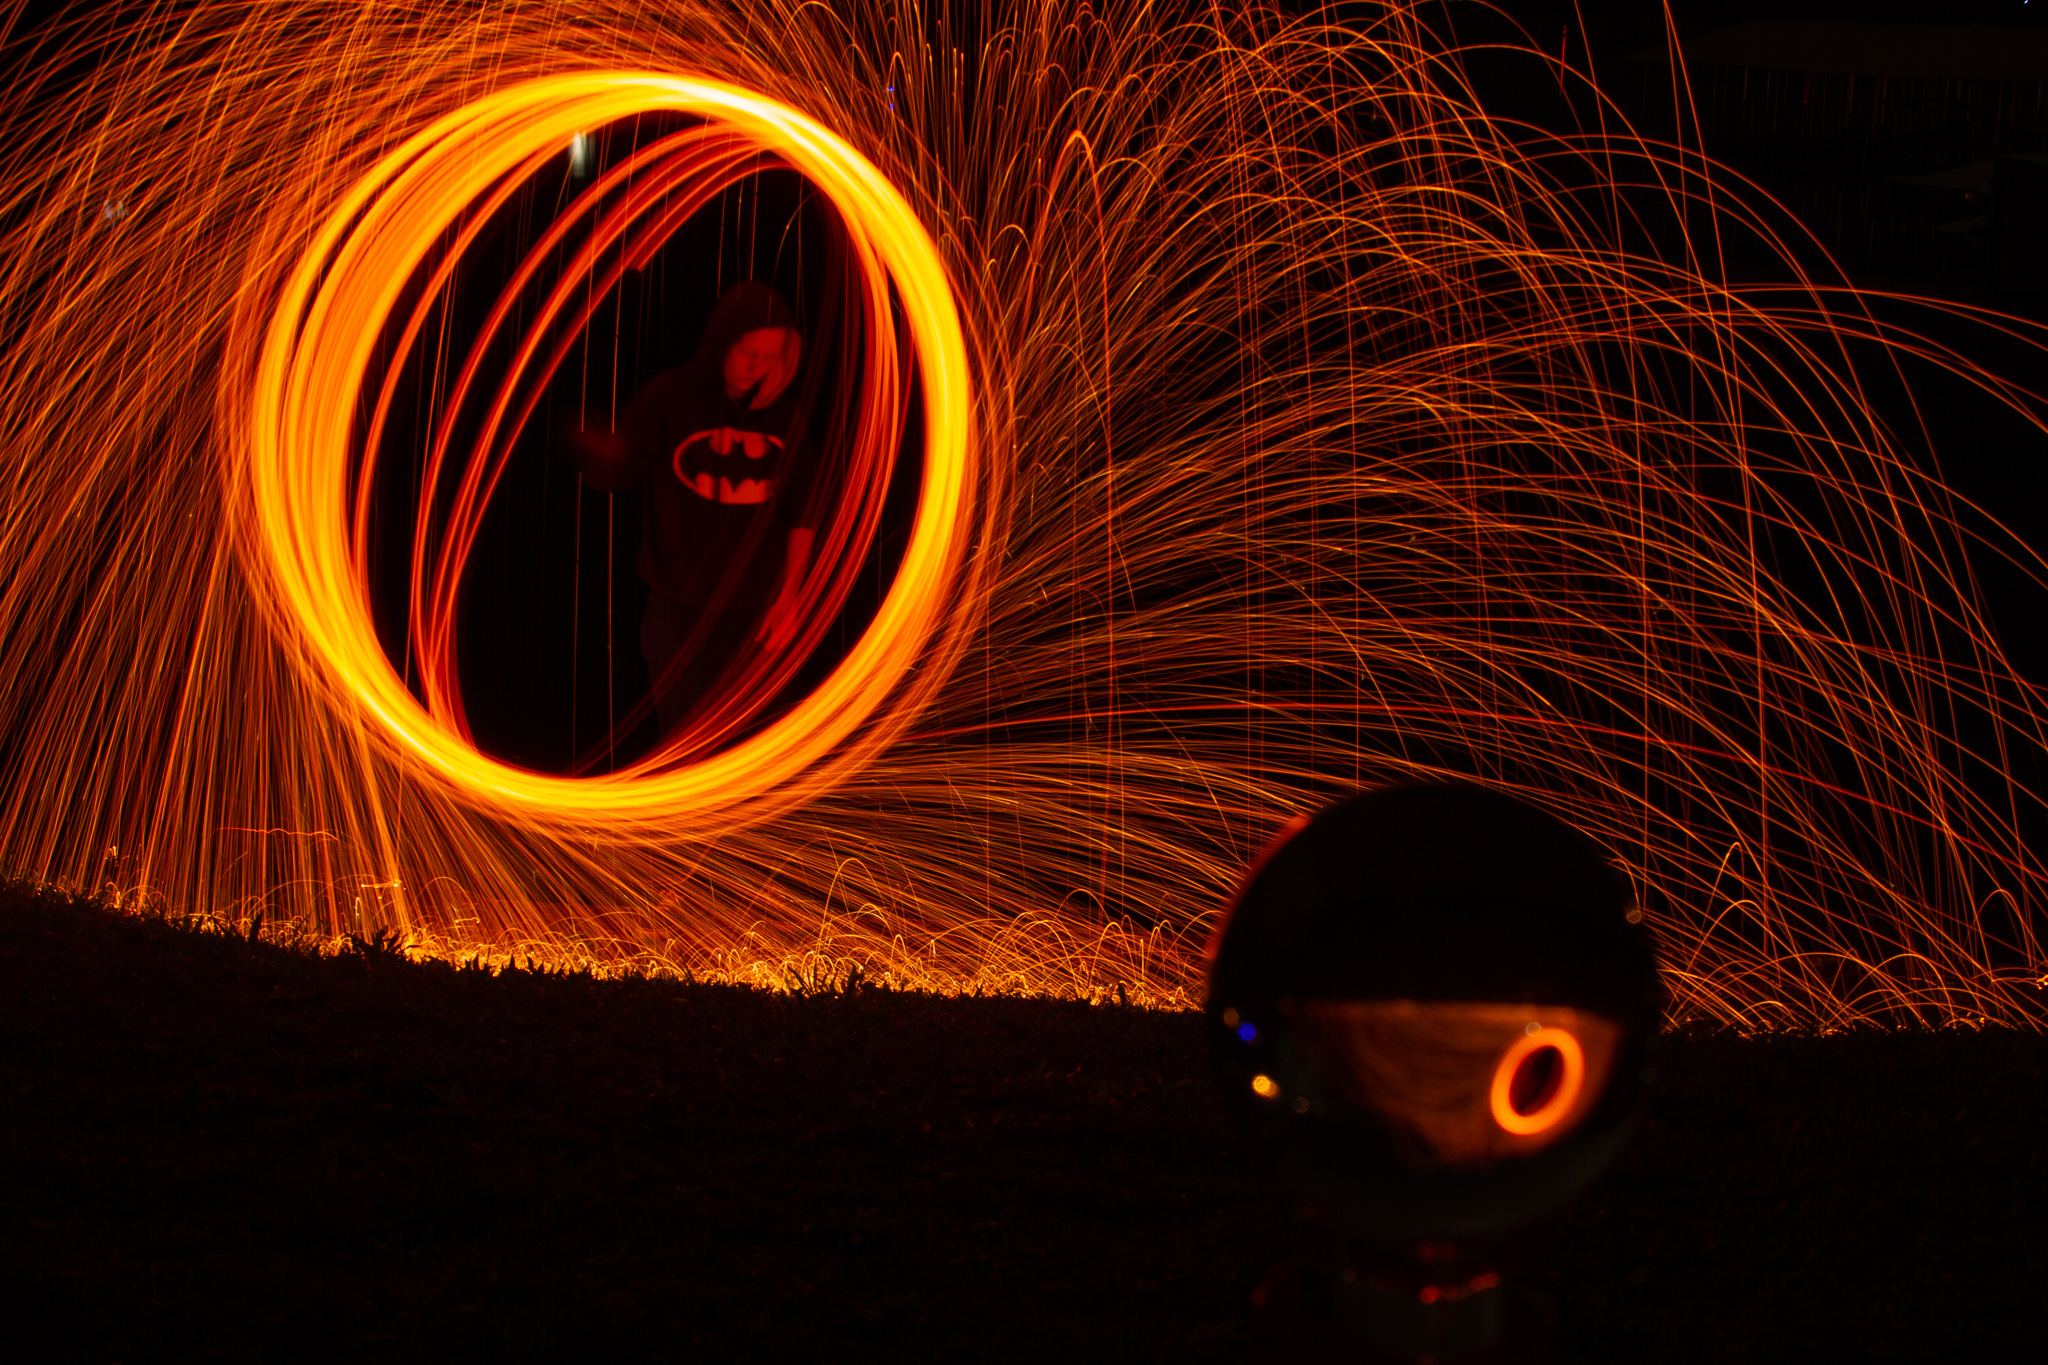 sparks fly in a circular motion around a subject wearing a batman hoodie, creating circular trails of light around them.